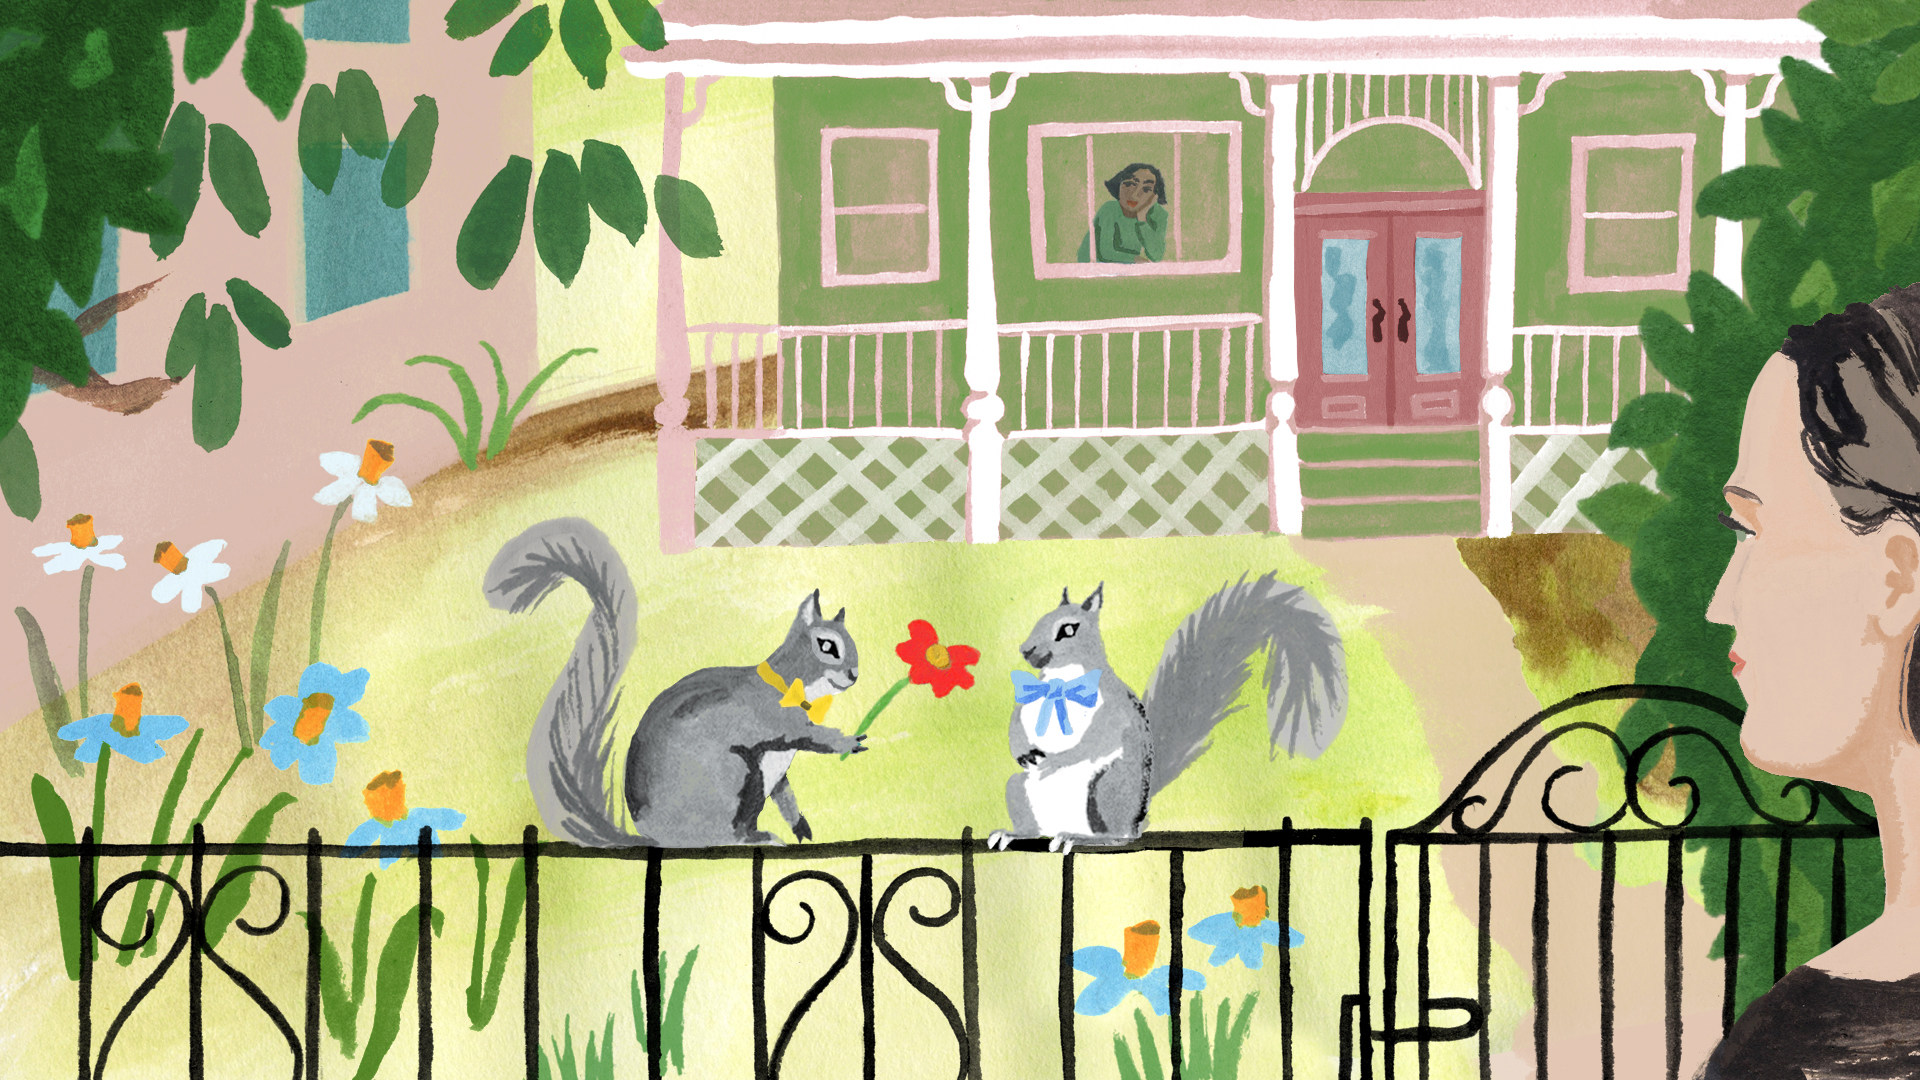 An illustration shows a colorful Victorian-style house with flourishing greenery and flowers in the front. Two squirrels in bow ties are perched on the front fence, and one is offering a flower to the other. A woman strolling by has stopped to look at them.